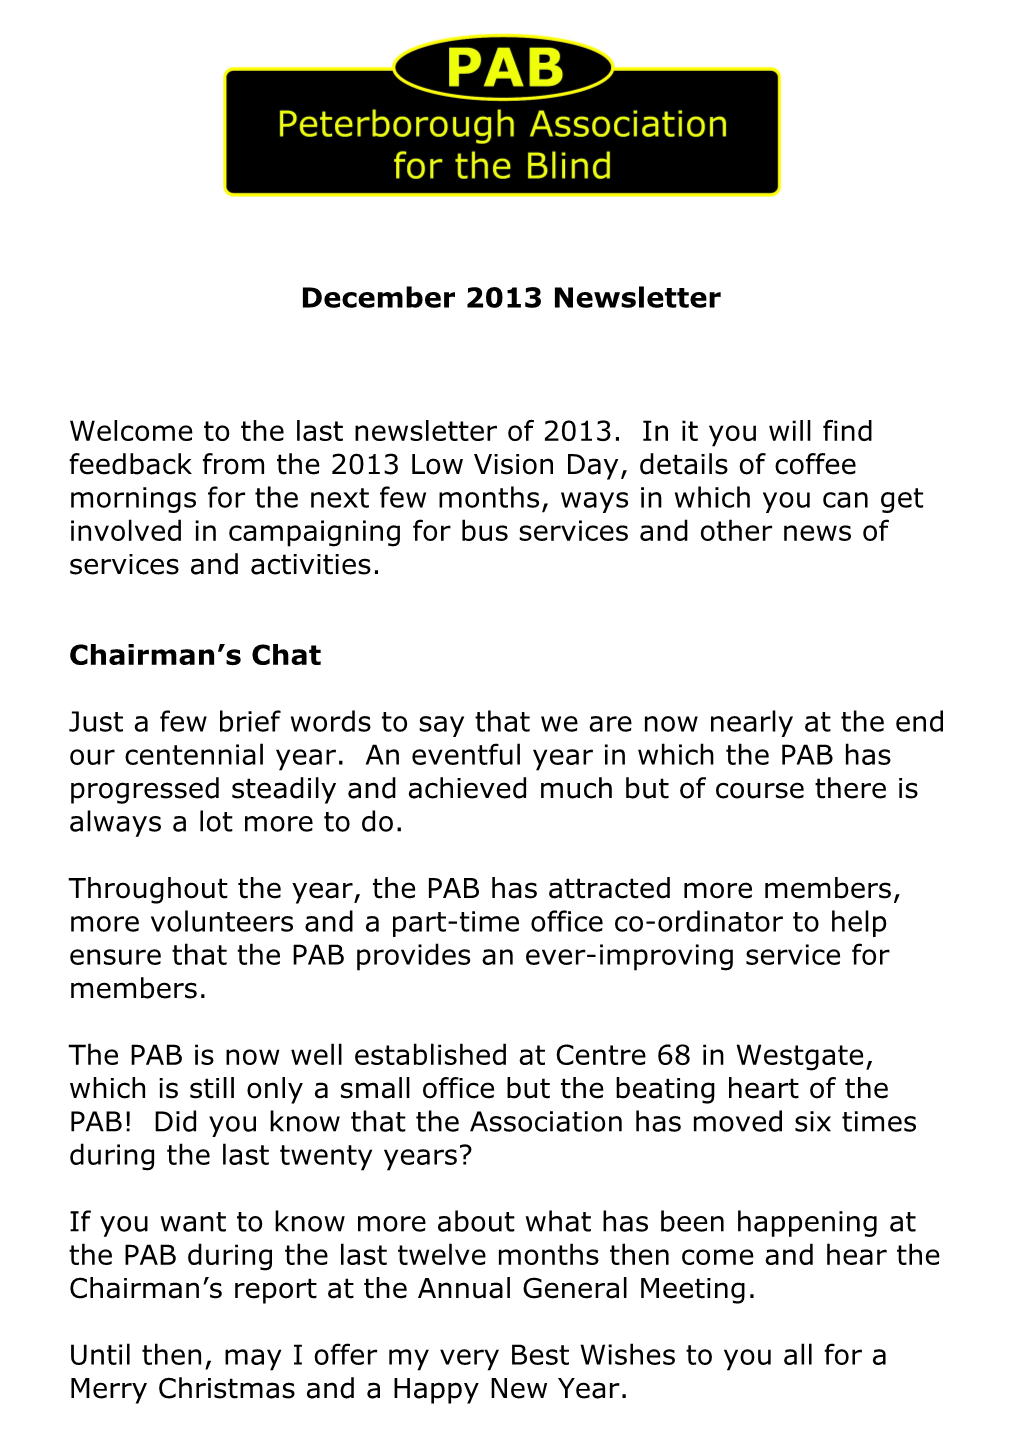 Welcome to the Last Newsletter of 2013. in It You Will Find Feedback from the 2013 Low